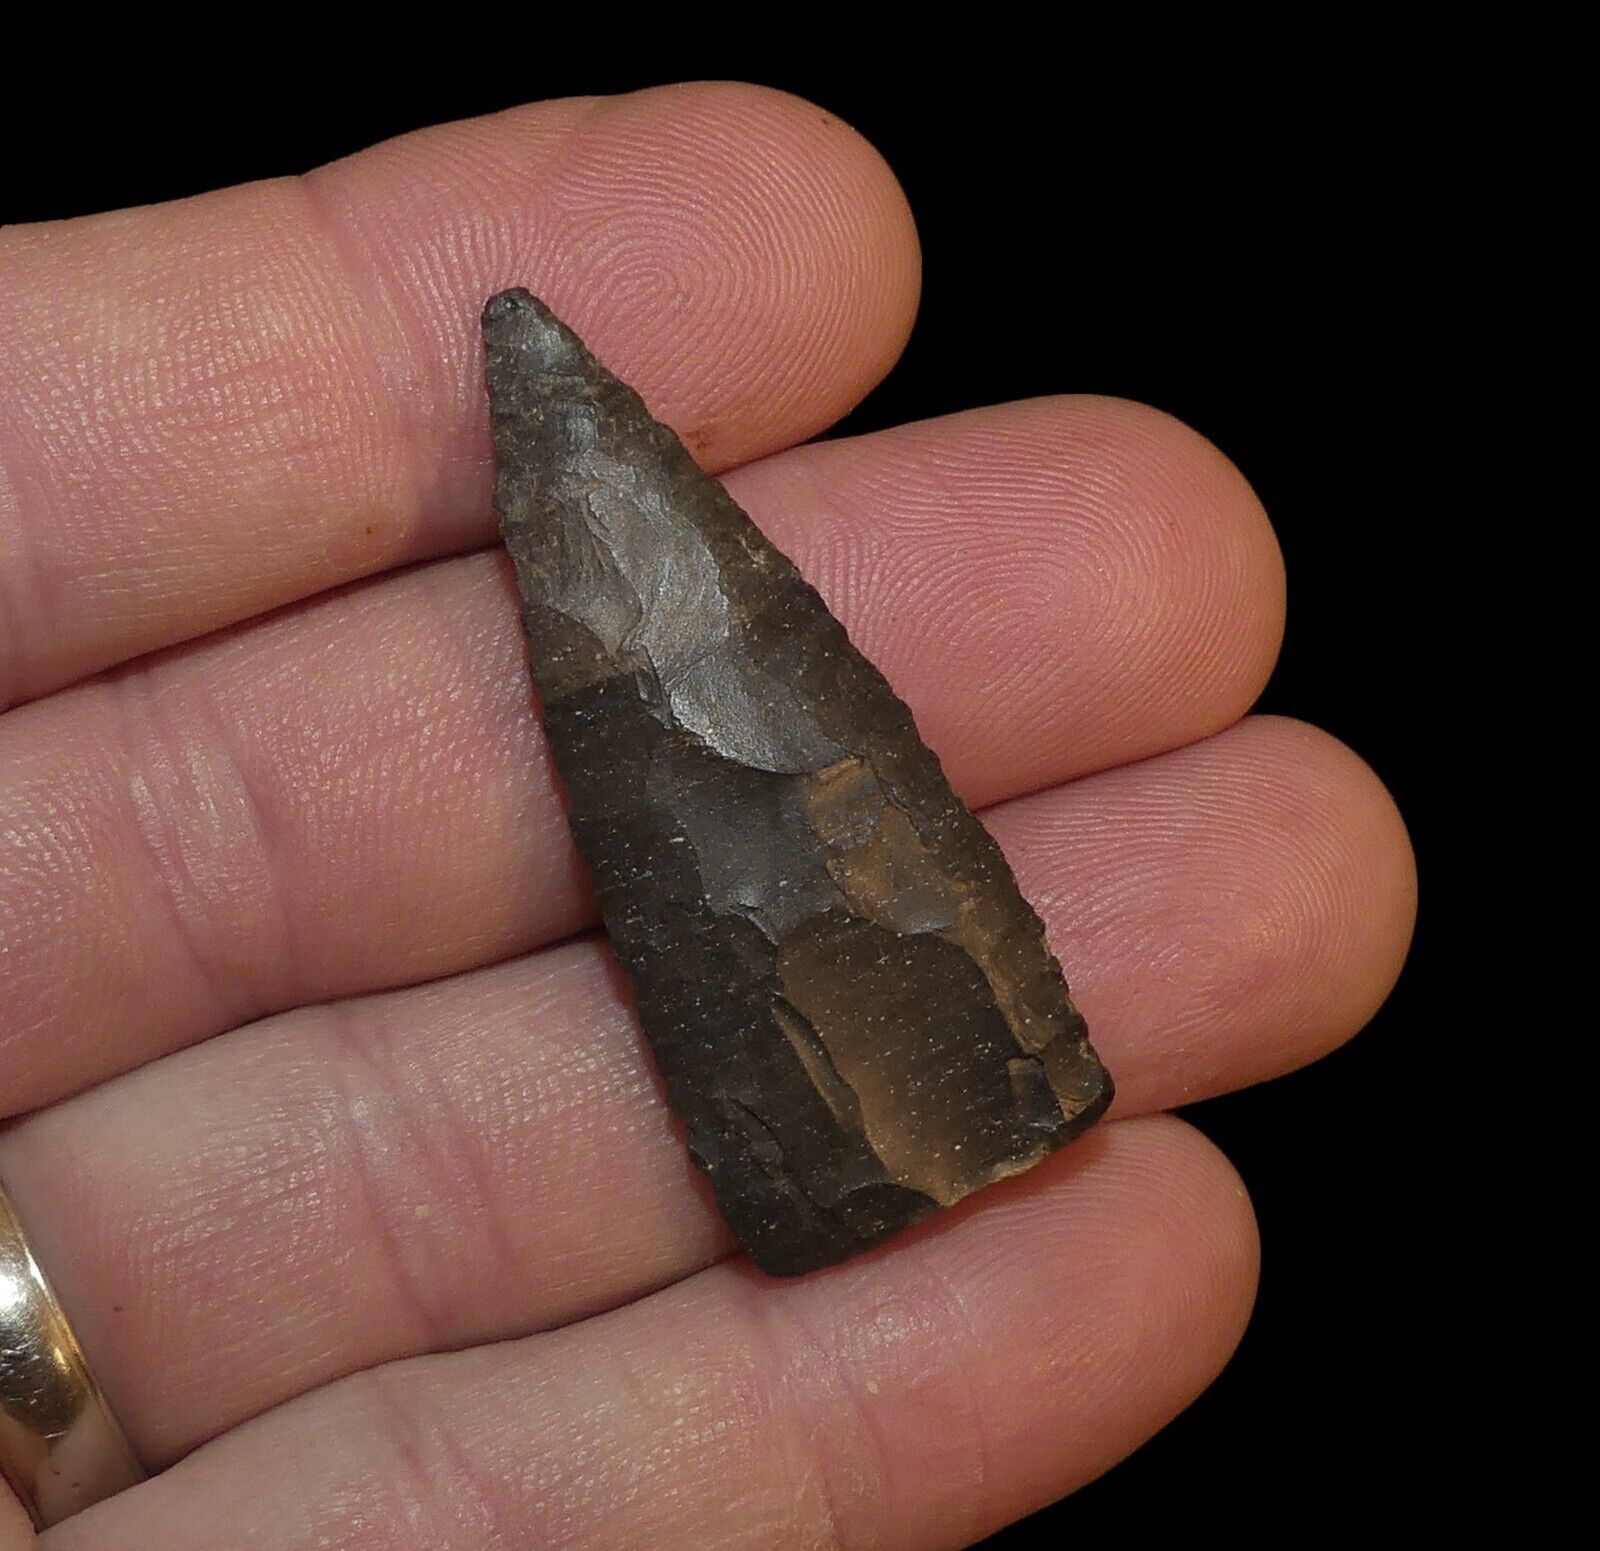 EARLY TRIANGULAR SOUTH TEXAS AUTHENTIC INDIAN ARROWHEAD ARTIFACT COLLECTIBLE